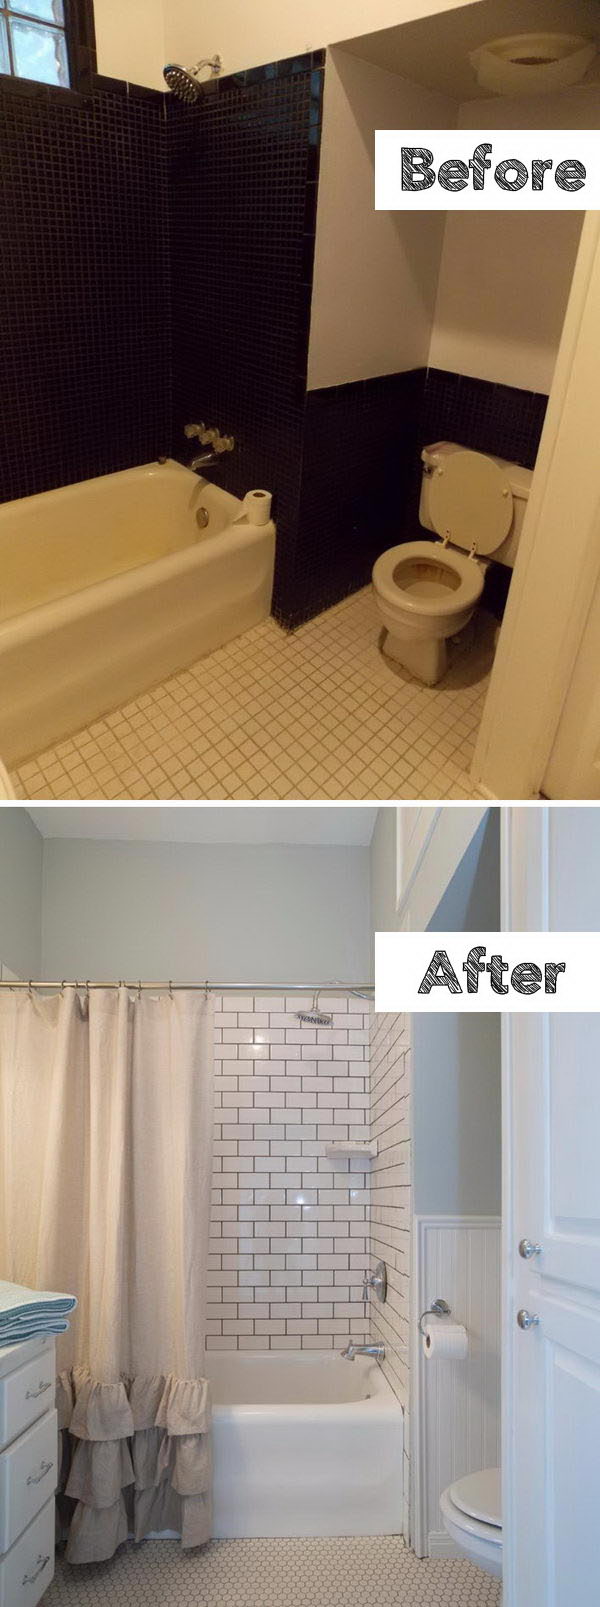 Install Subway Tiles Just Around The Tub and Paint Around The Bathroom. 